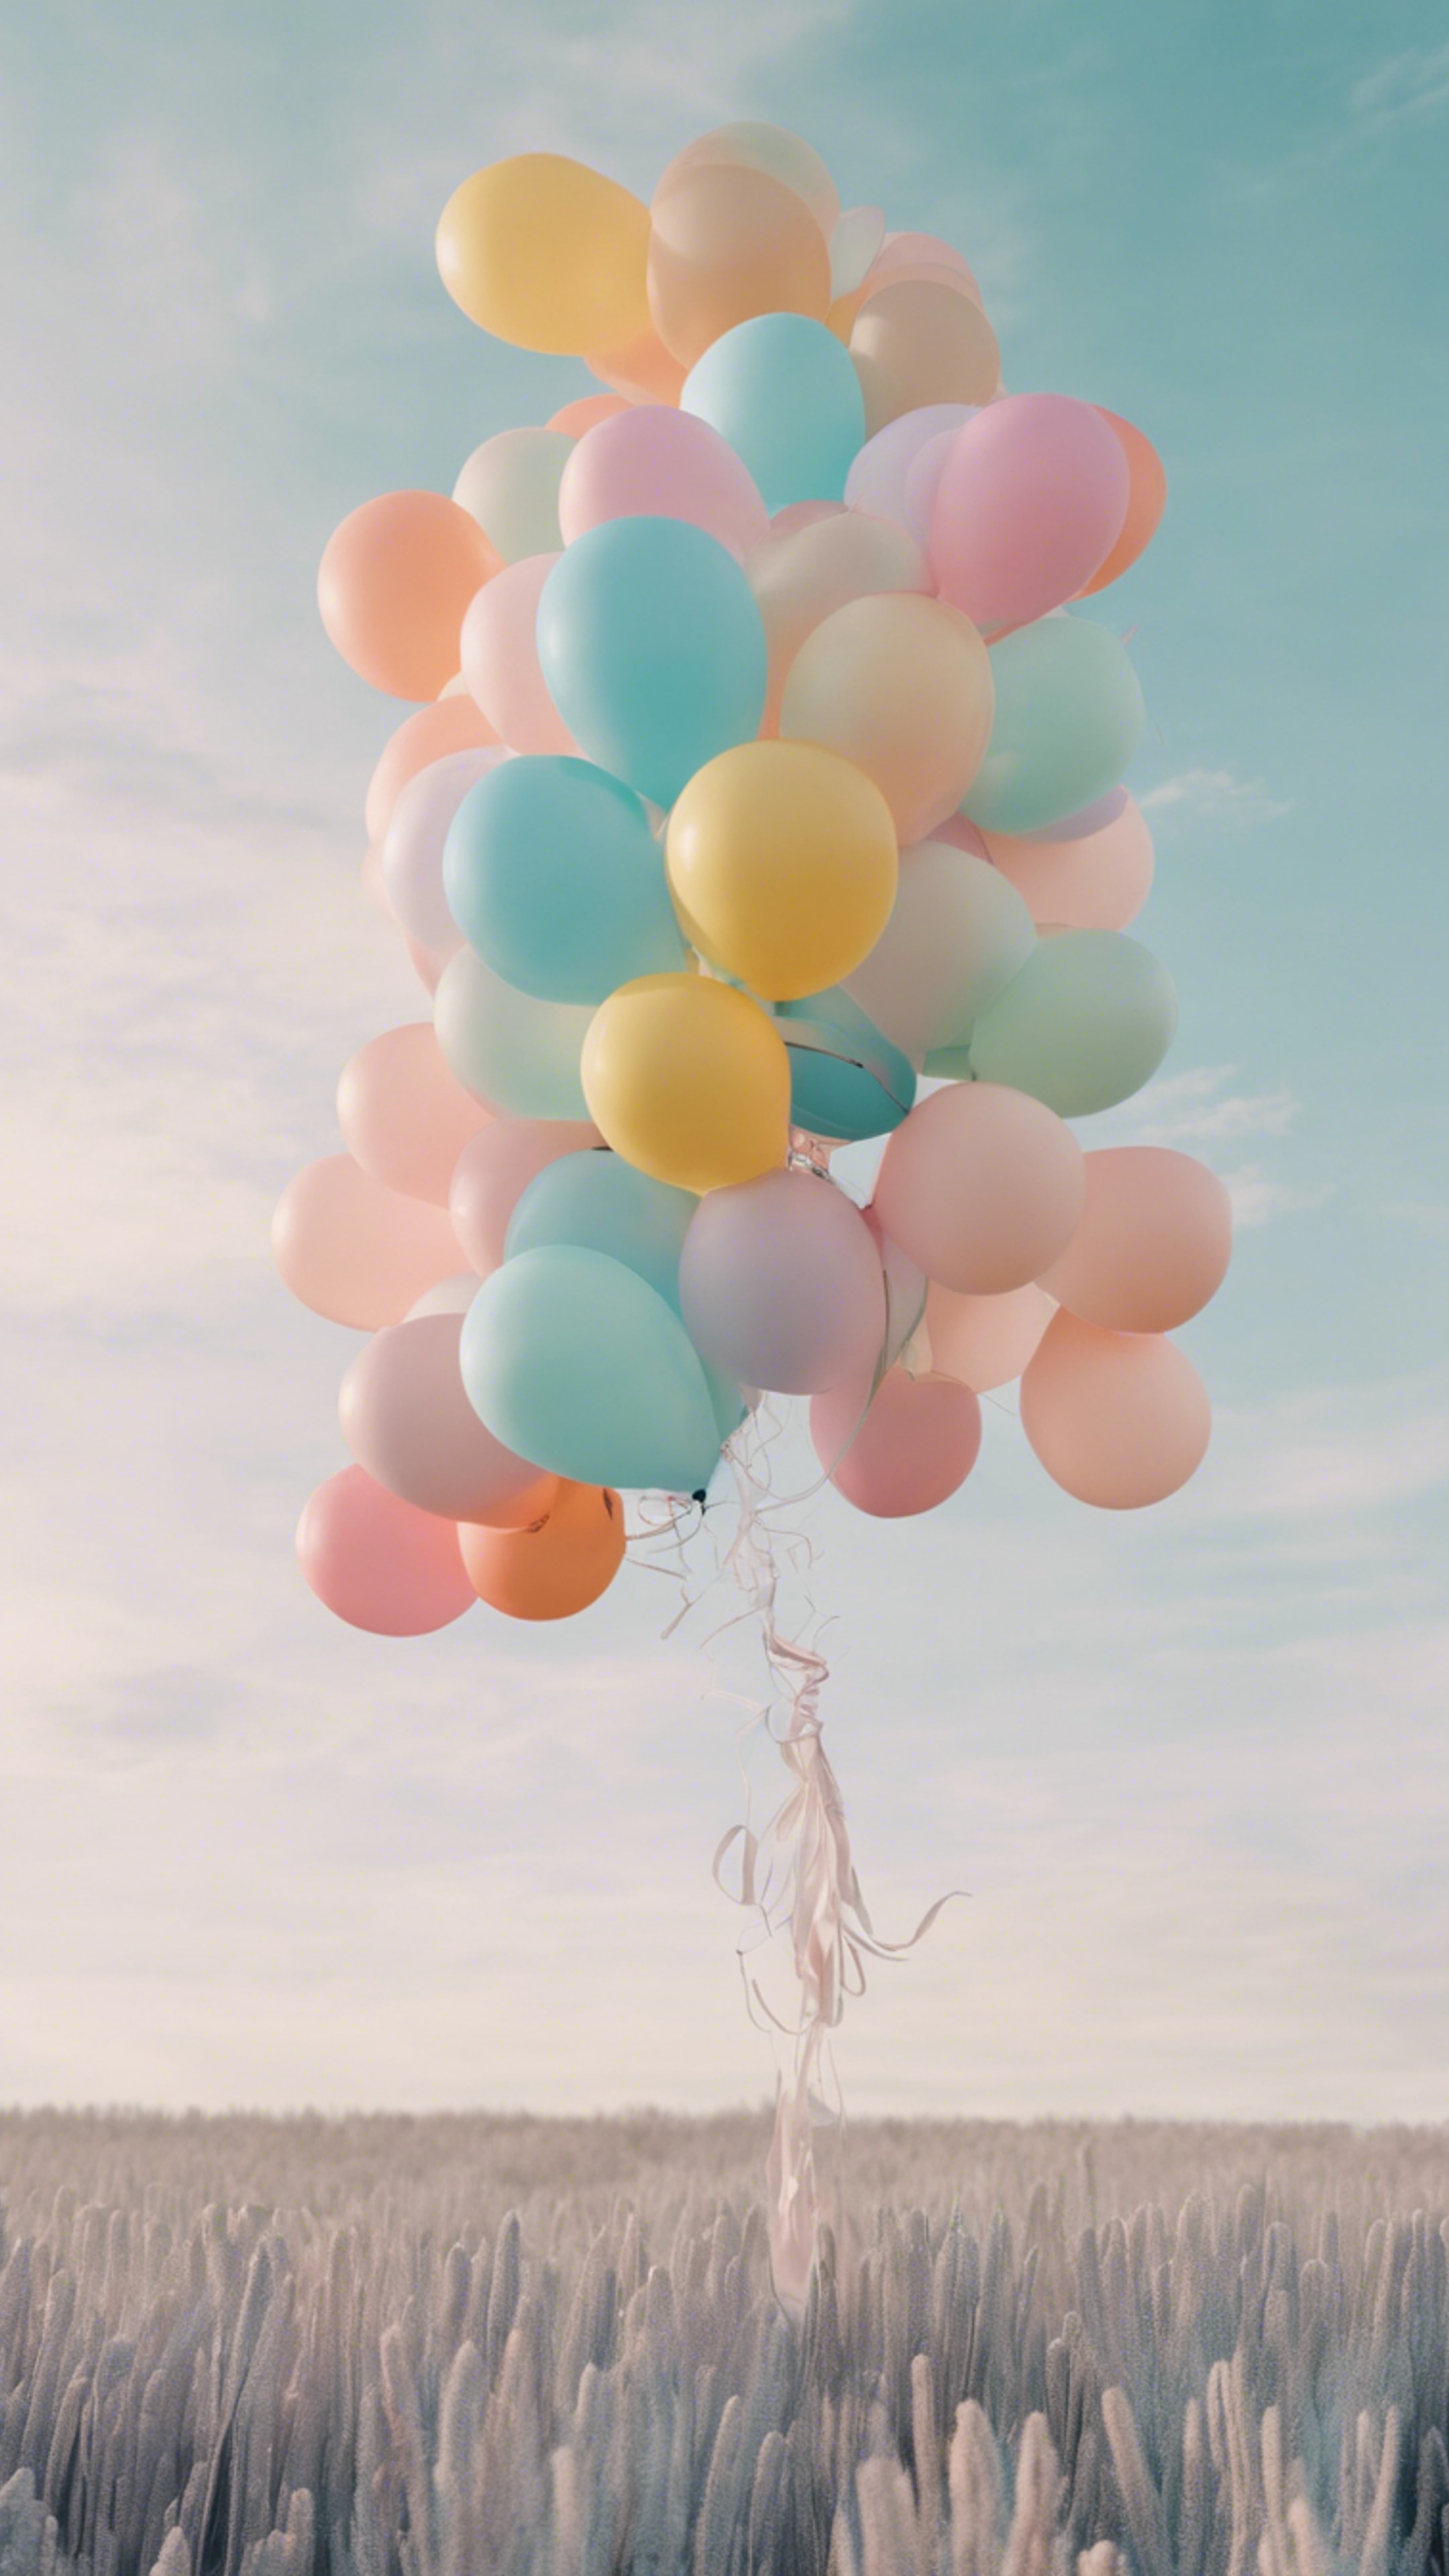 A cool pastel colored cluster of balloons floating in a clear sky. Tapeta[294975c578db48368ab8]